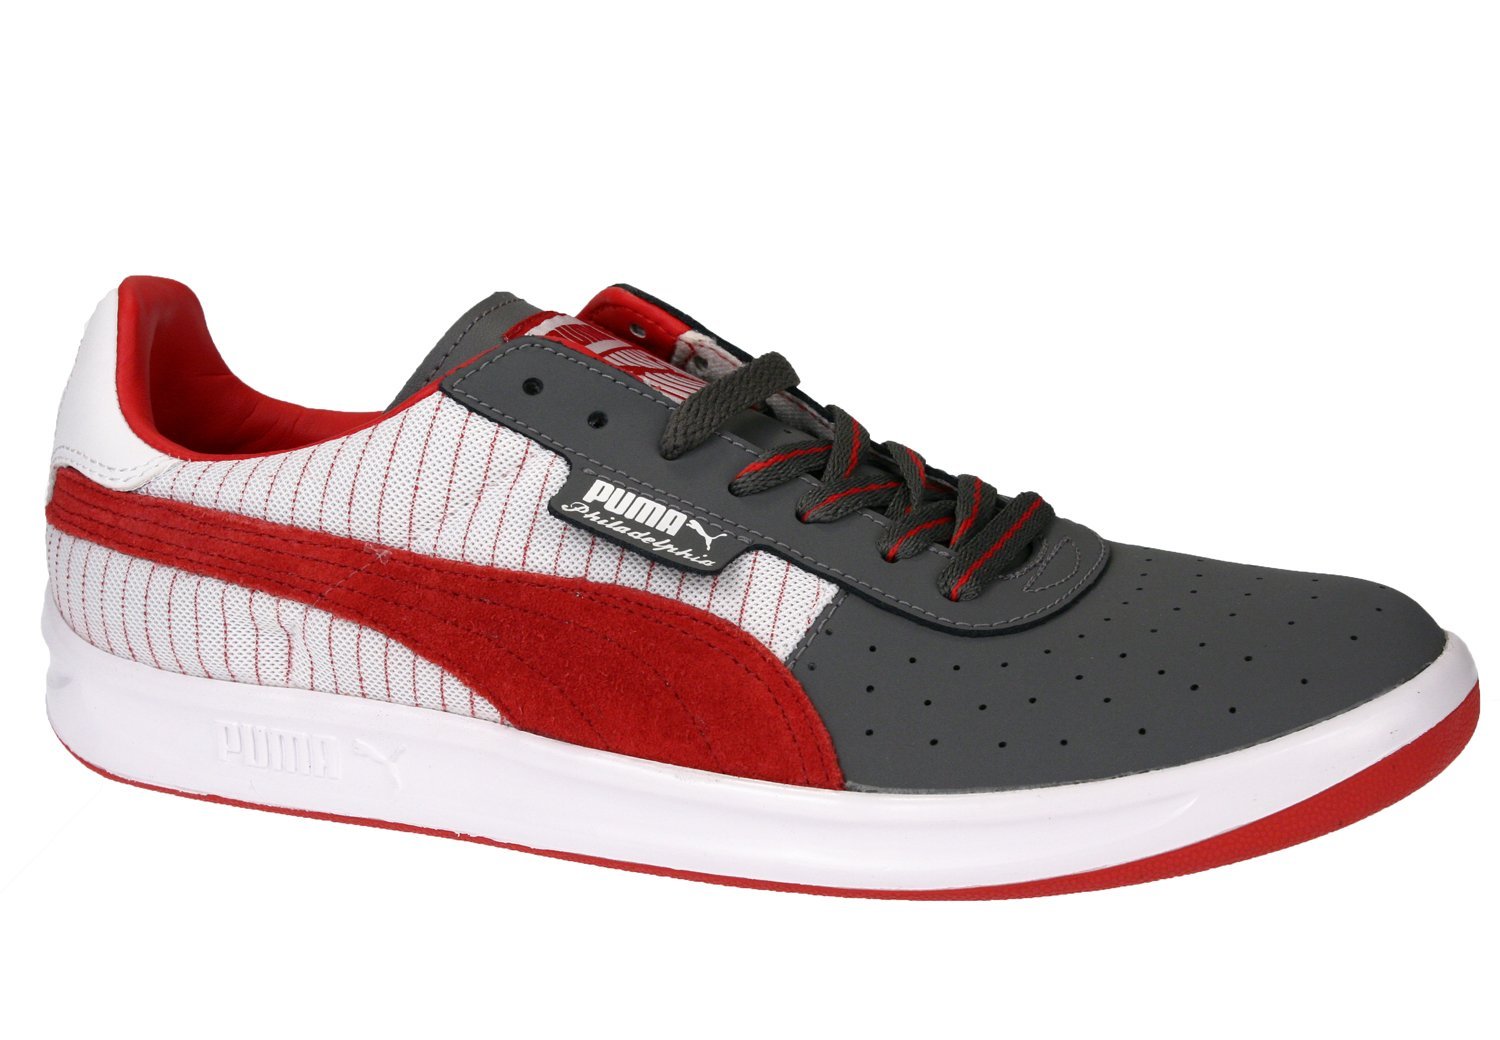 Puma California Men's City Sneakers Shoes - City and Color Options | eBay